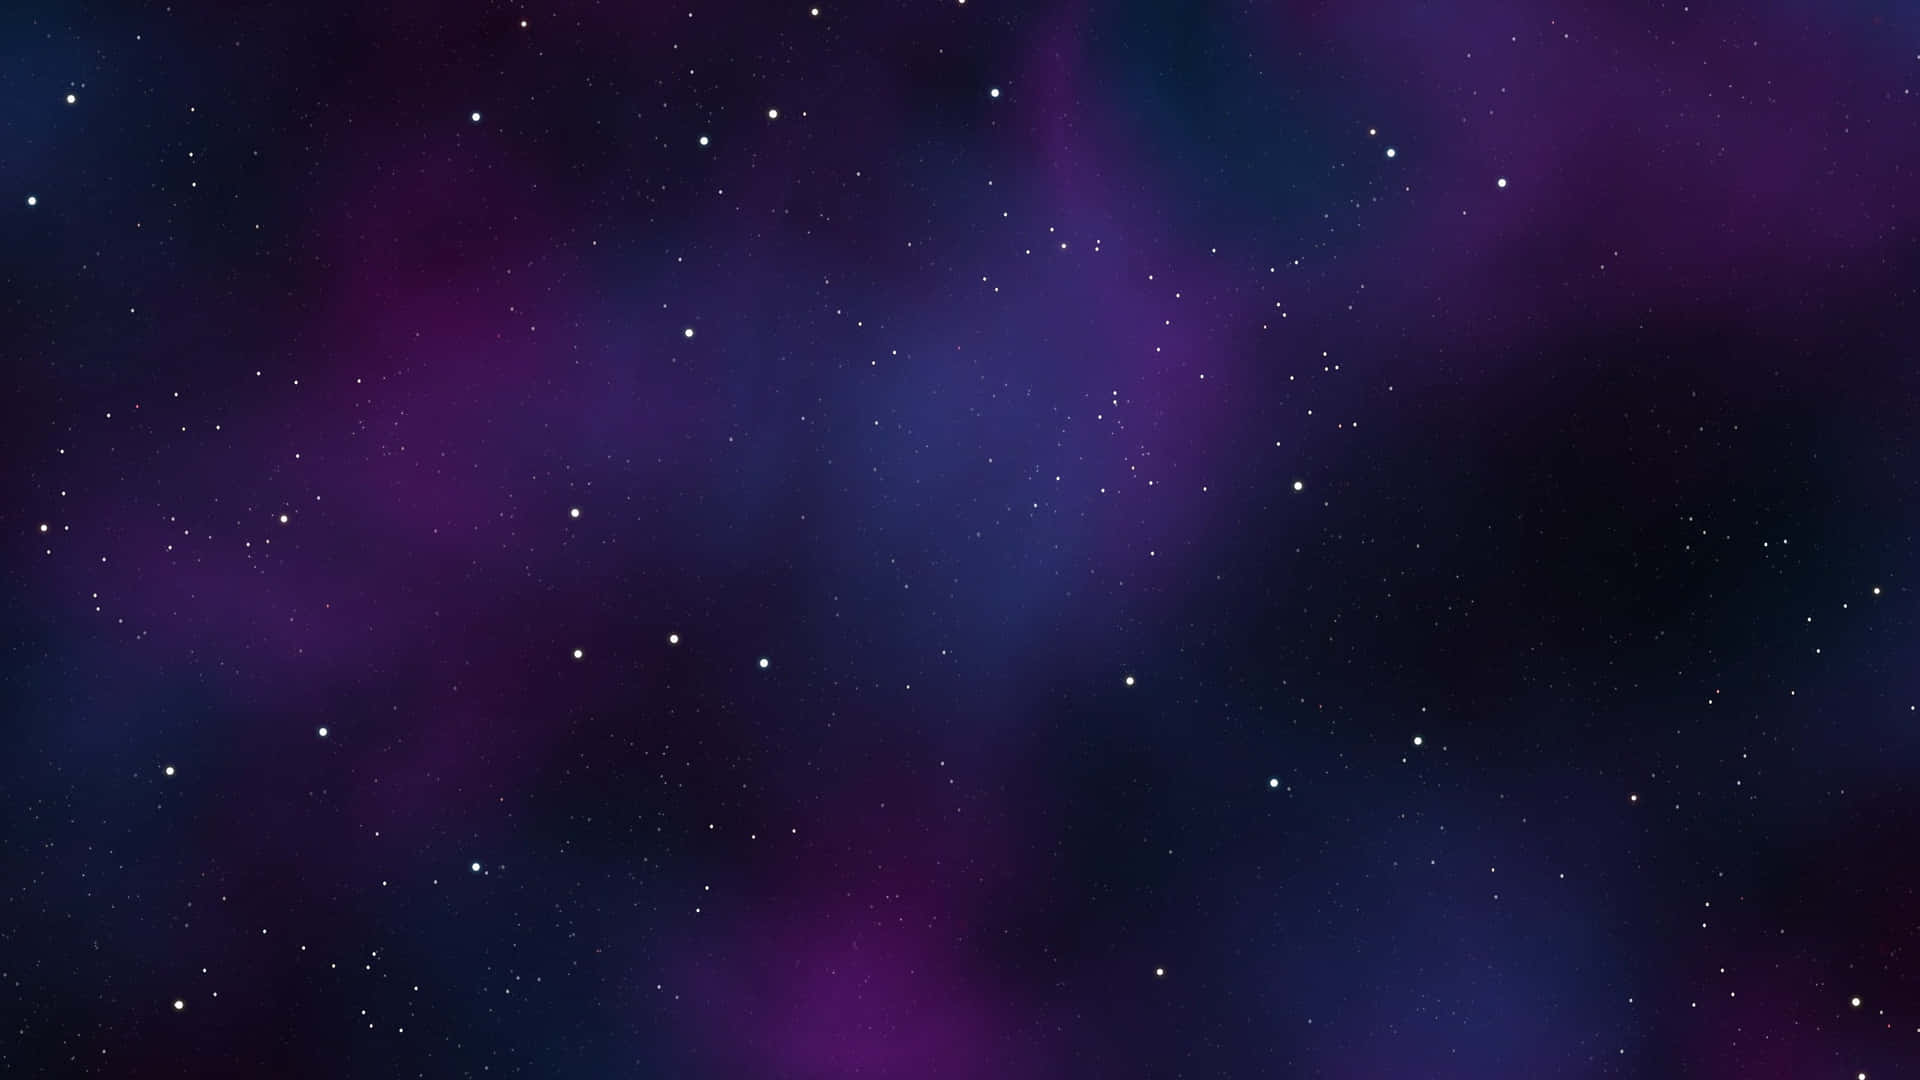 "A breathtaking view of a dark and mysterious black and purple galaxy" Wallpaper